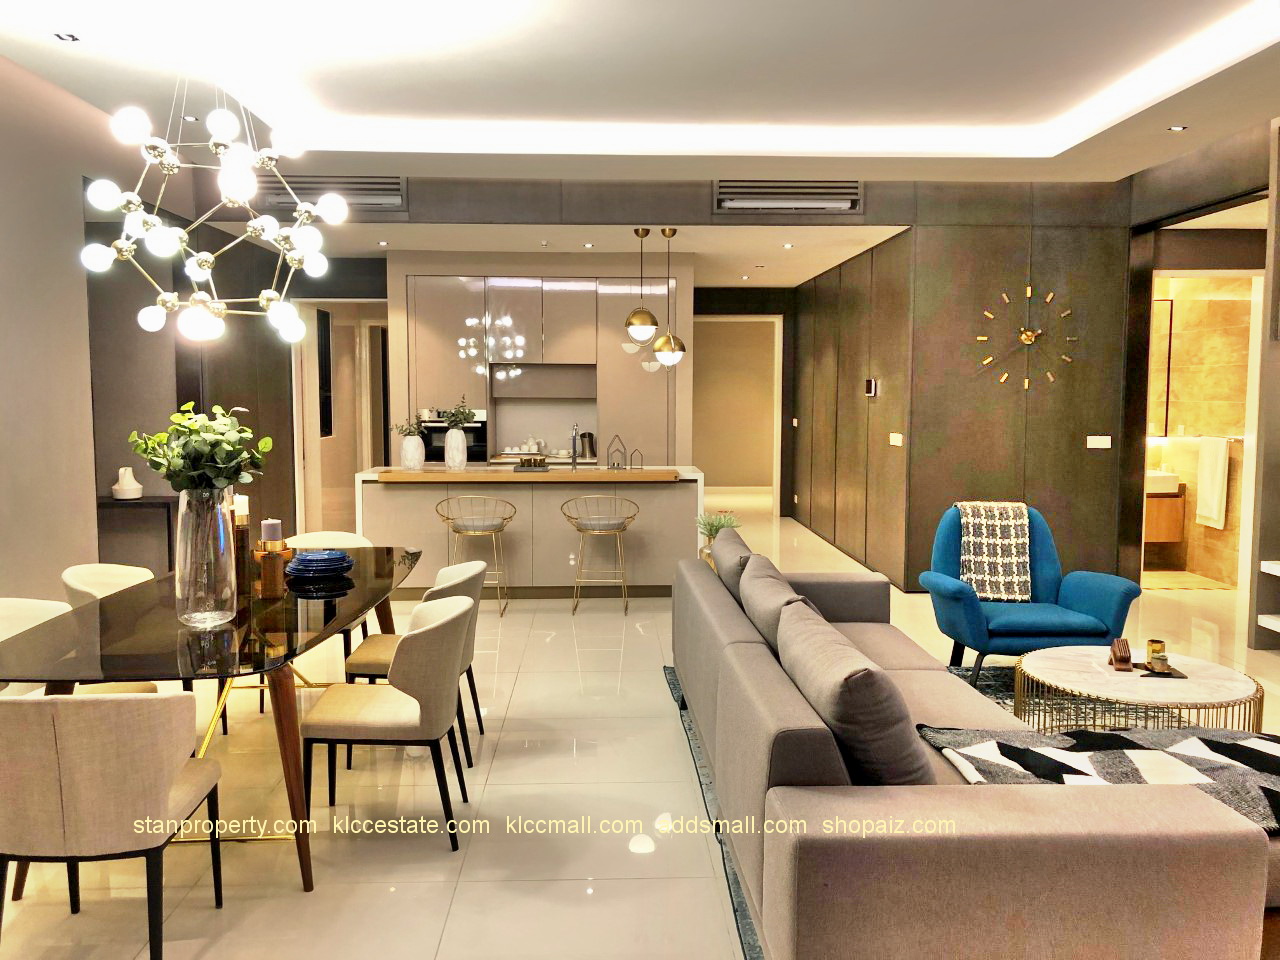 Seputeh Mid Valley Luxury Condo New Launch